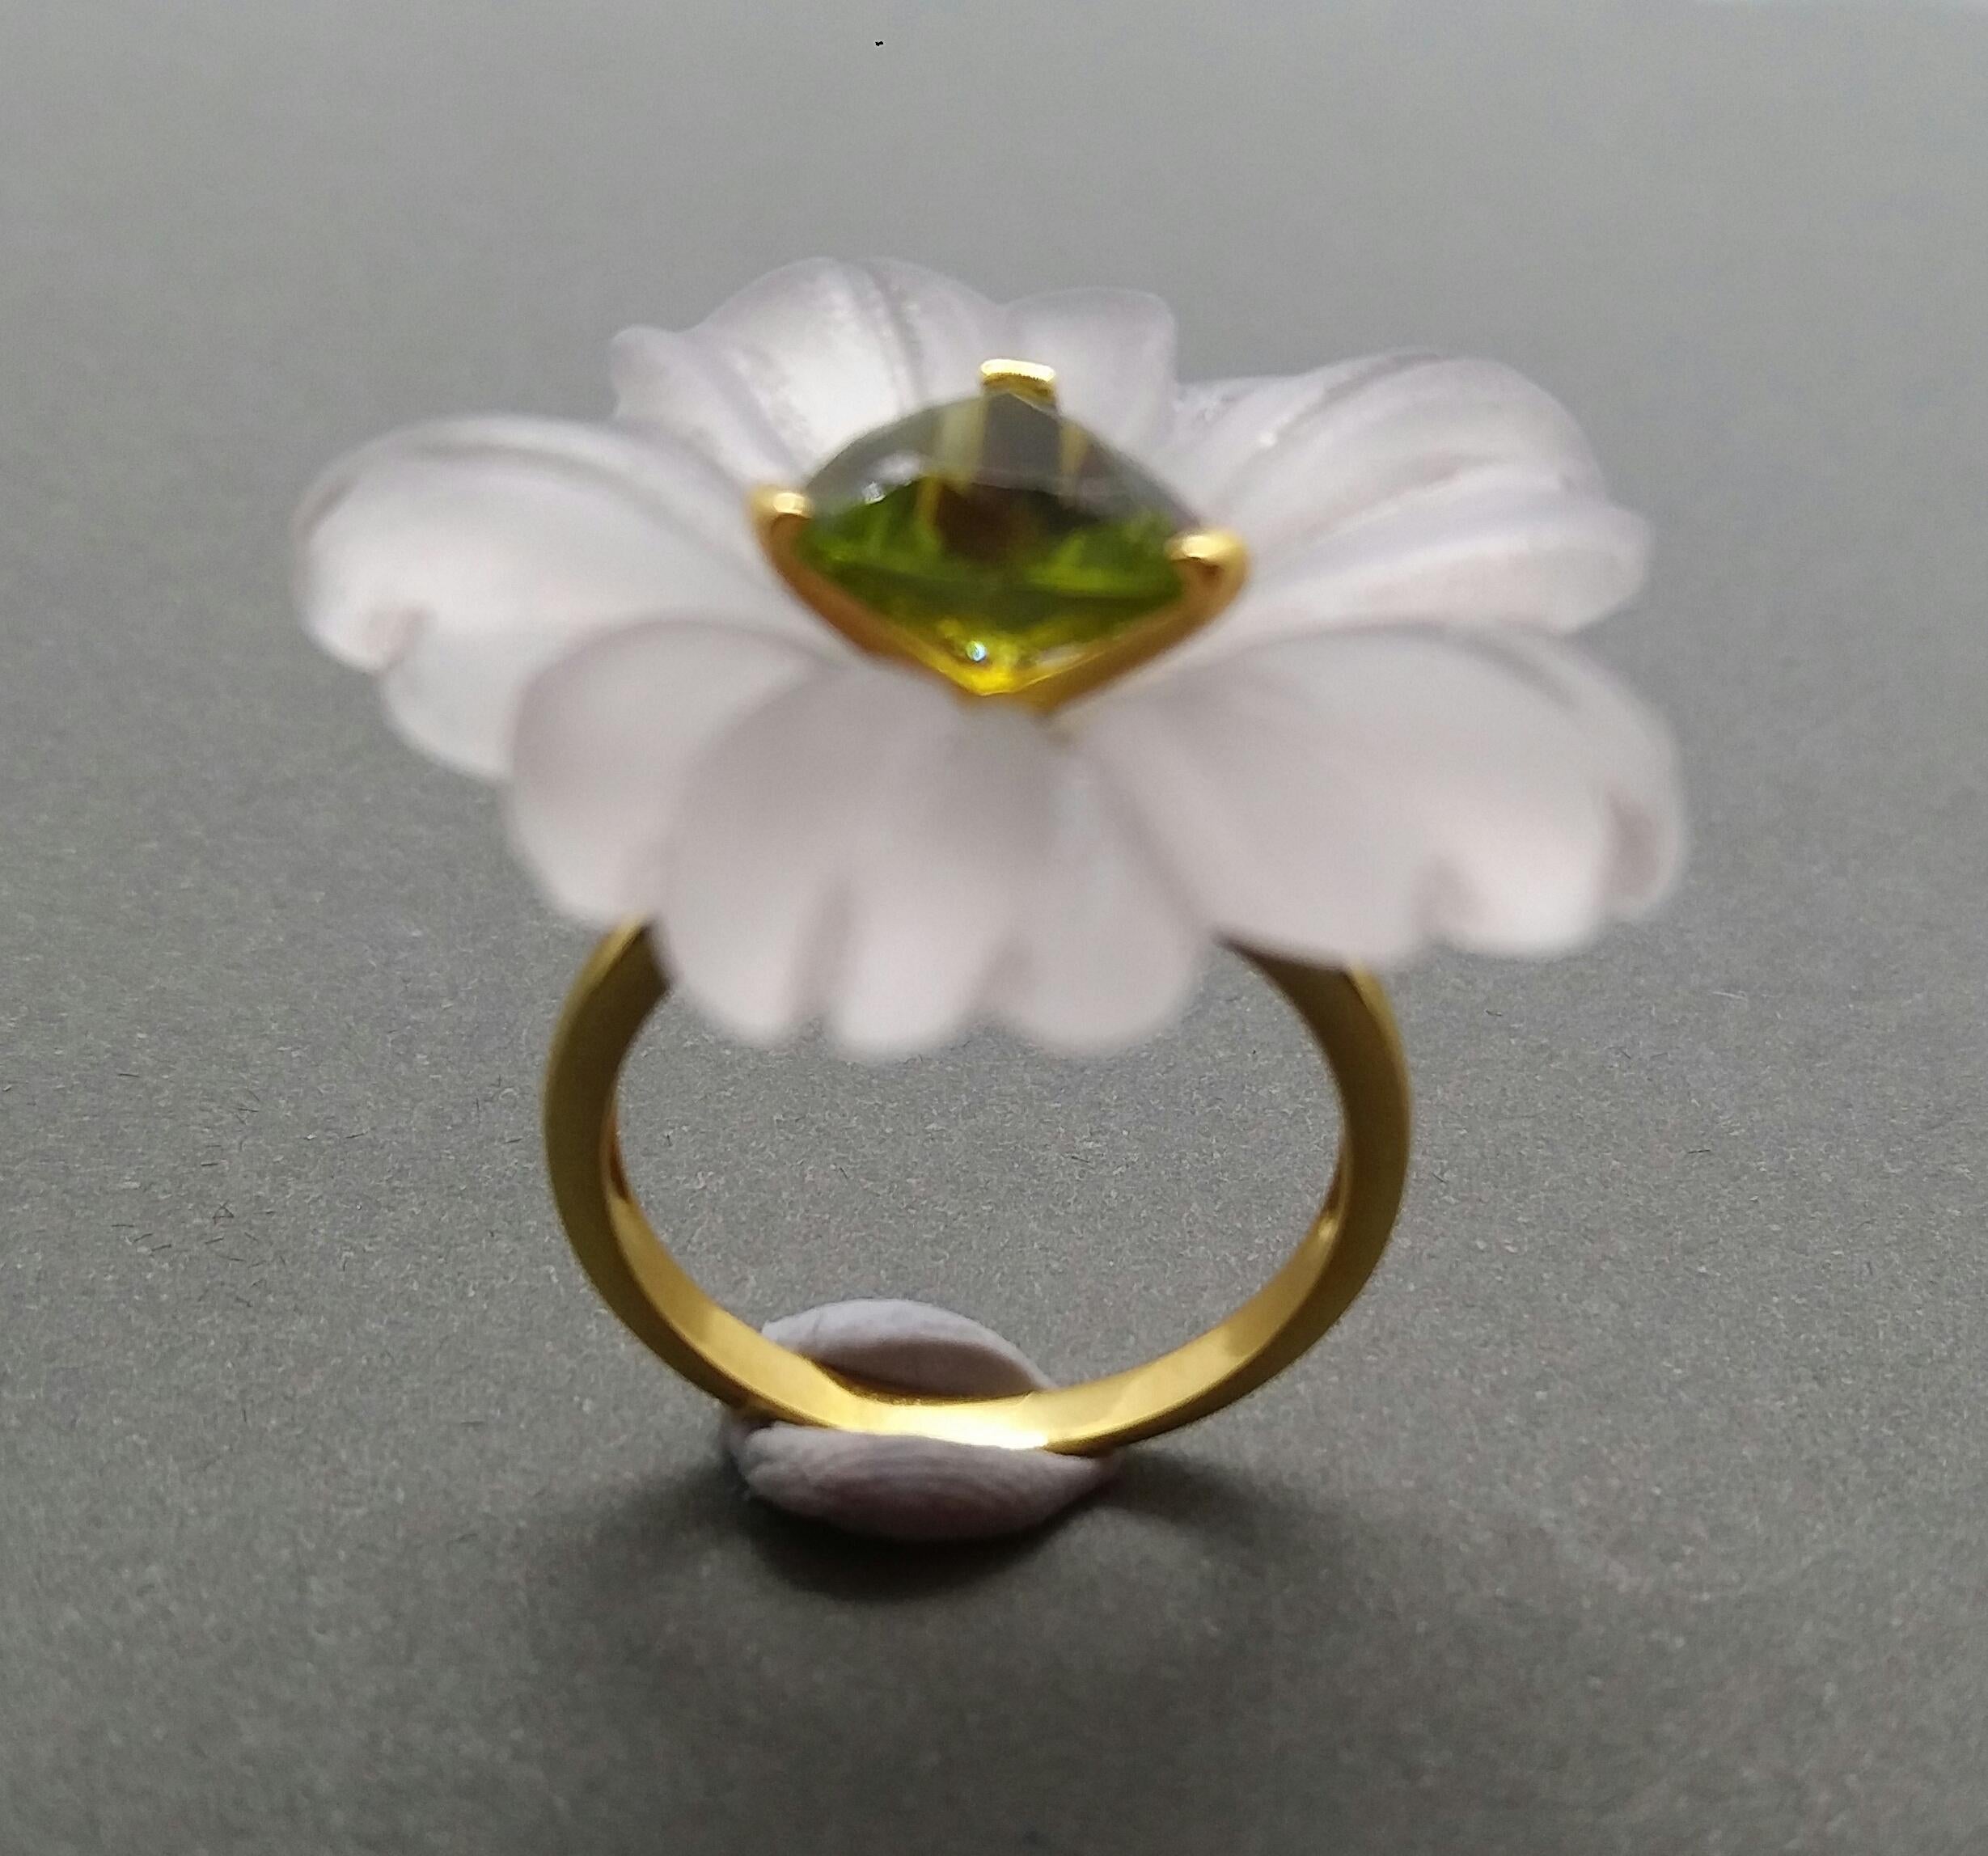 Flower carved Natural Rock Crystal (White Quartz) of 28 mm. in diameter with in the center a Trillion Cut Peridot 10 mm size set in solid 14 Kt yellow gold is mounted on top of a 14 Kt. yellow gold shank. US size # 7 (but resizable according to